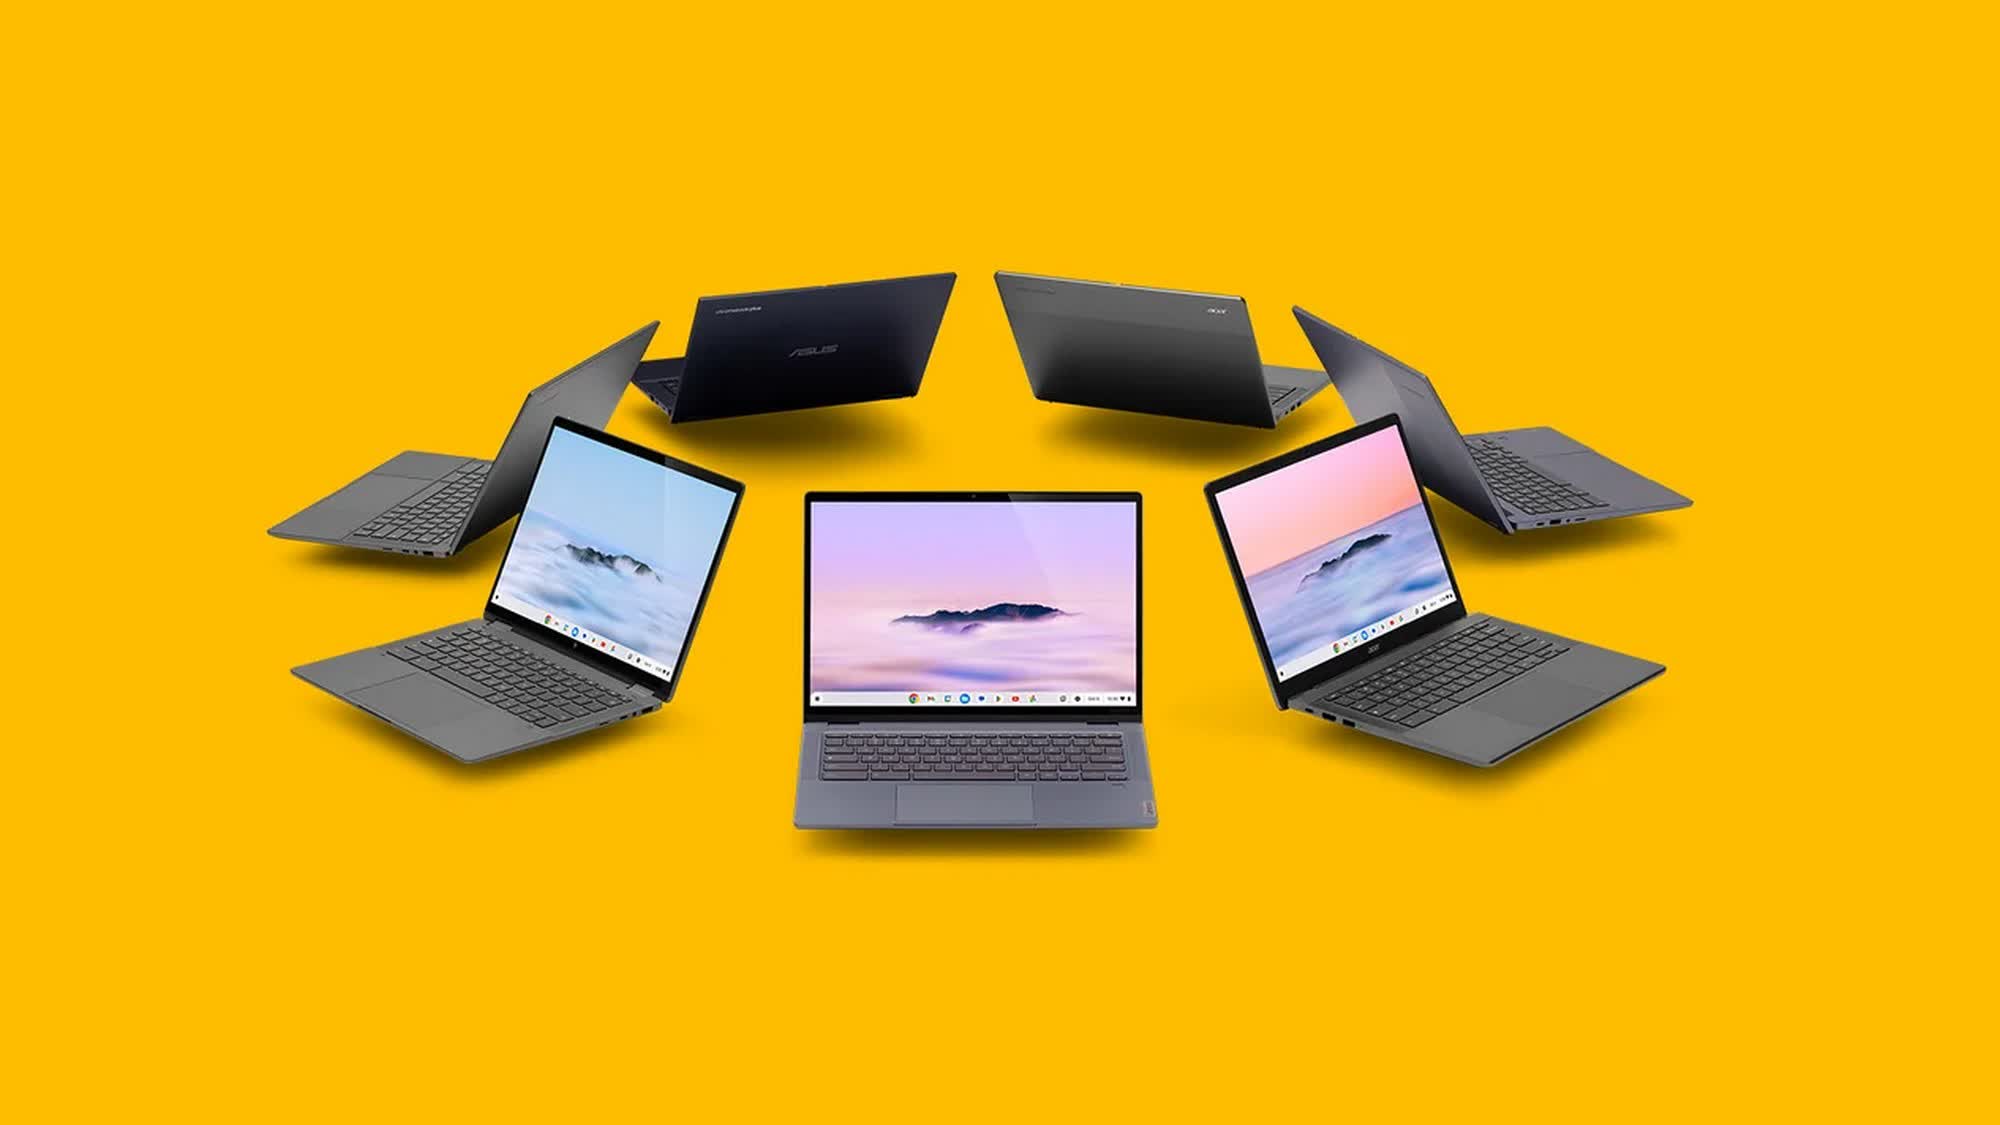 New Chromebook Plus laptops will have premium hardware and exclusive AI software